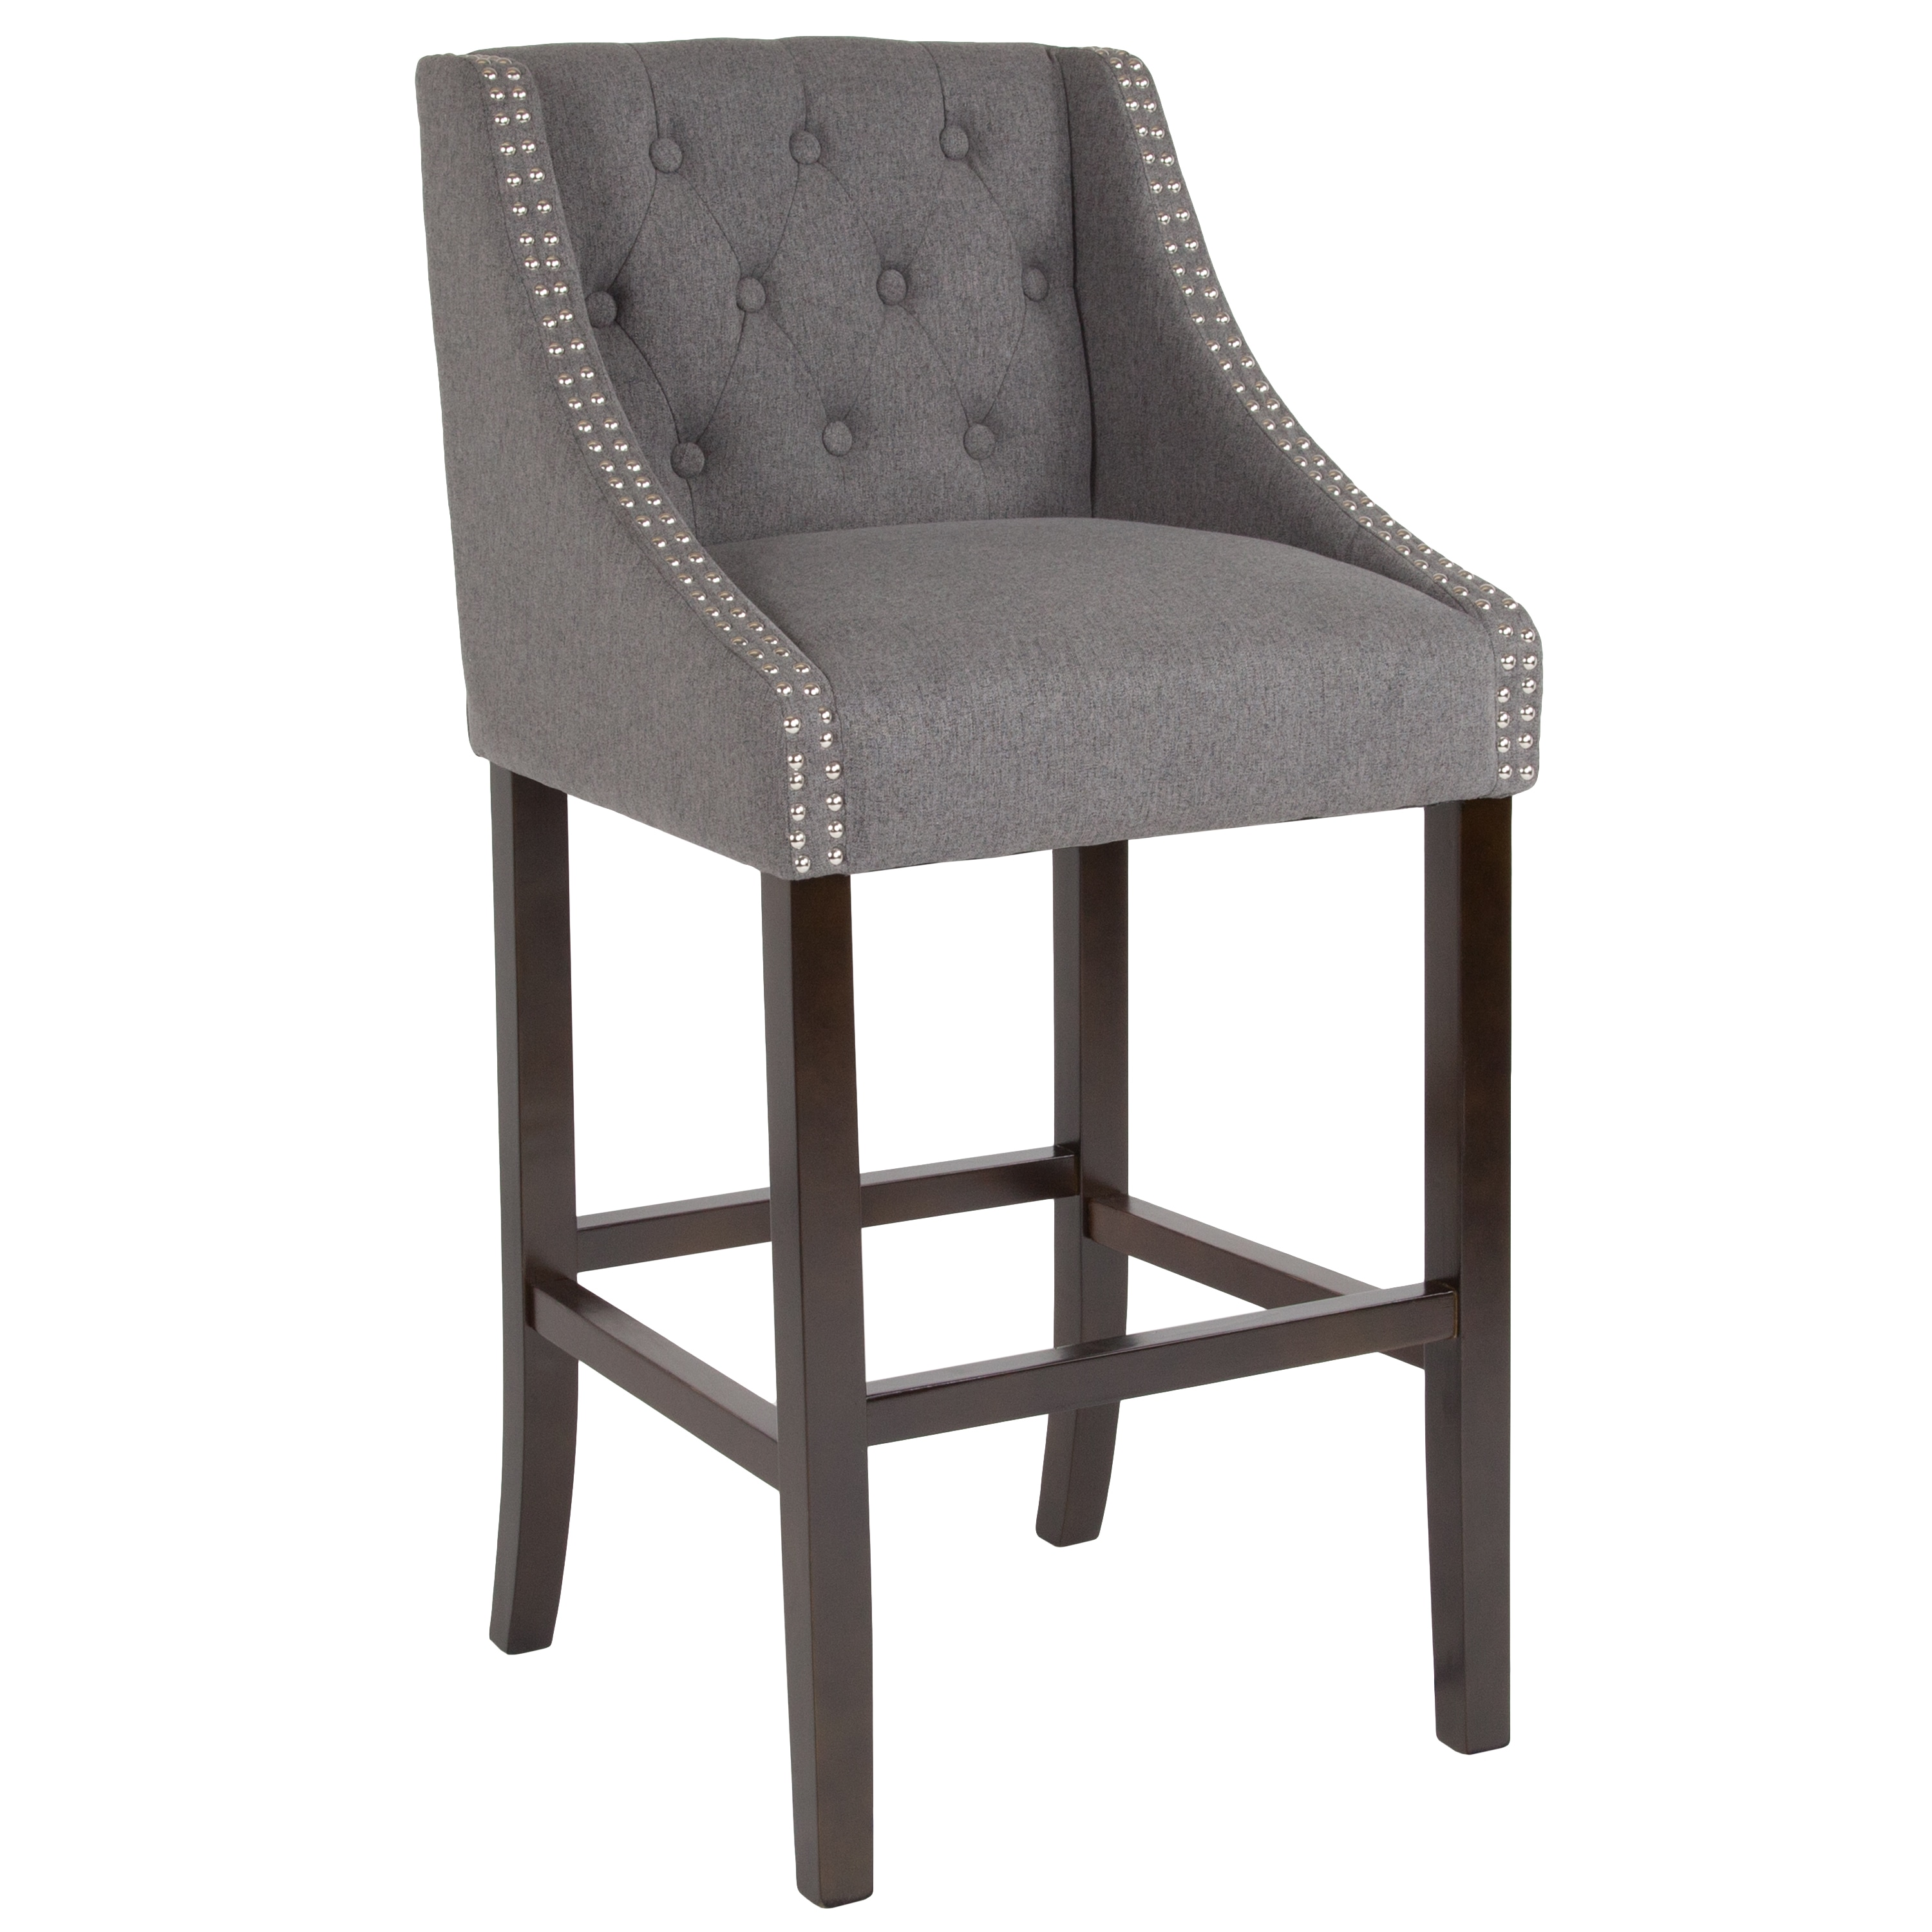 Upholstered Bar Stool In The Stools, Fabric Bar Stools With Arms